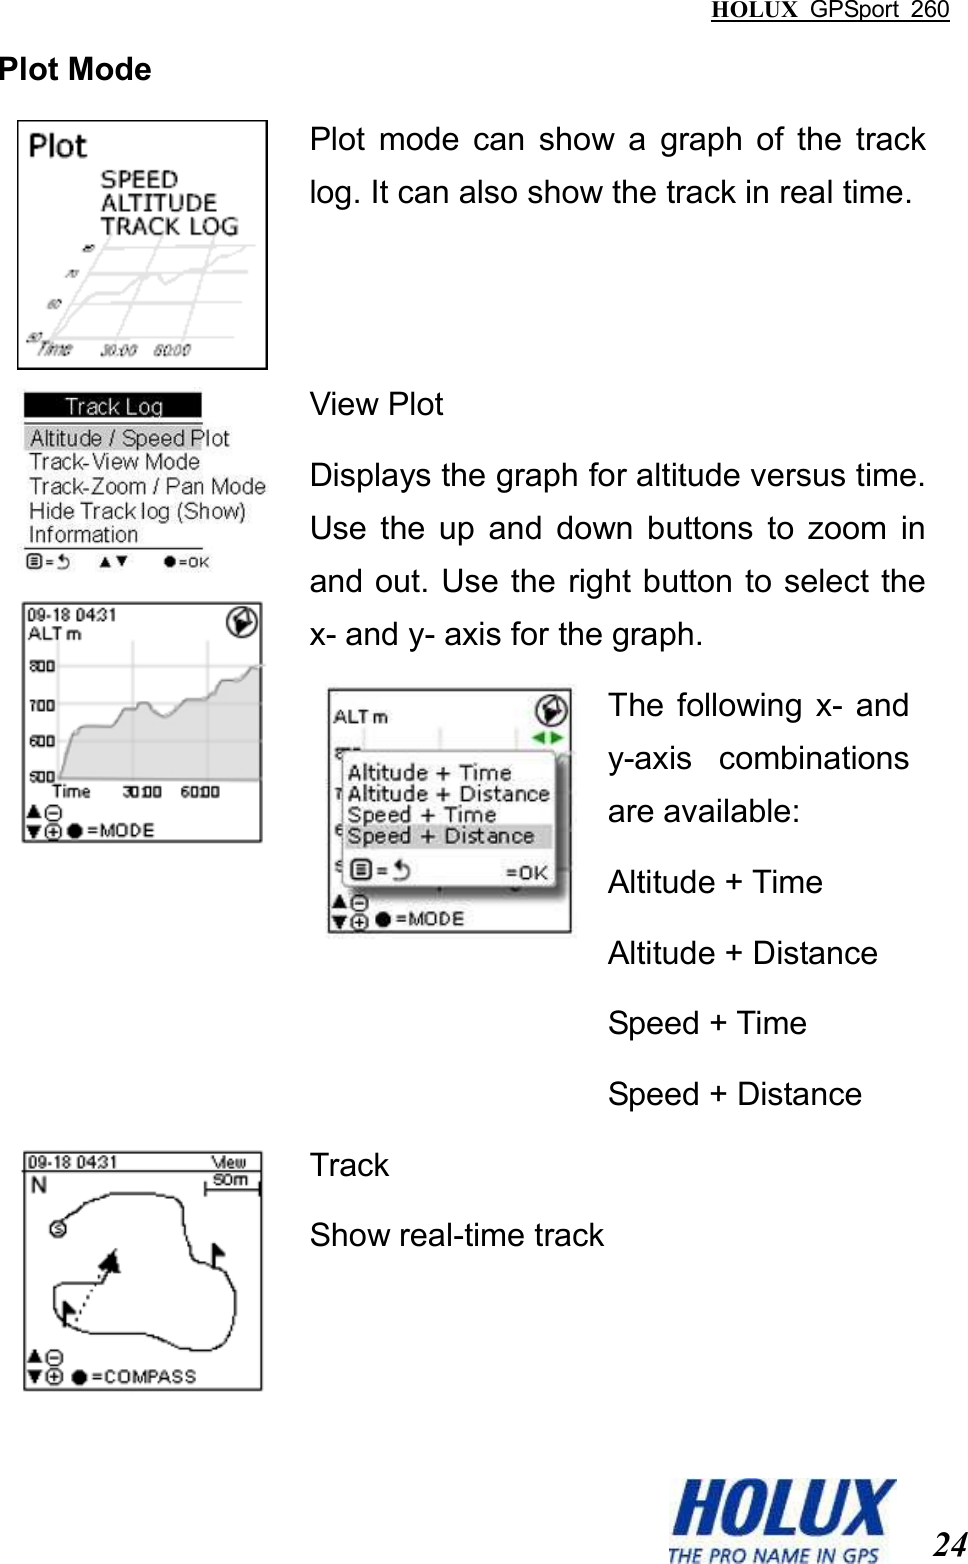 HOLUX  GPSport  260  24 Plot Mode  Plot  mode  can  show  a  graph  of  the  track log. It can also show the track in real time.   View Plot Displays the graph for altitude versus time. Use  the  up  and  down  buttons  to  zoom  in and out. Use the right button to select the x- and y- axis for the graph.  The  following  x-  and y-axis  combinations are available:   Altitude + Time Altitude + Distance Speed + Time Speed + Distance   Track Show real-time track  